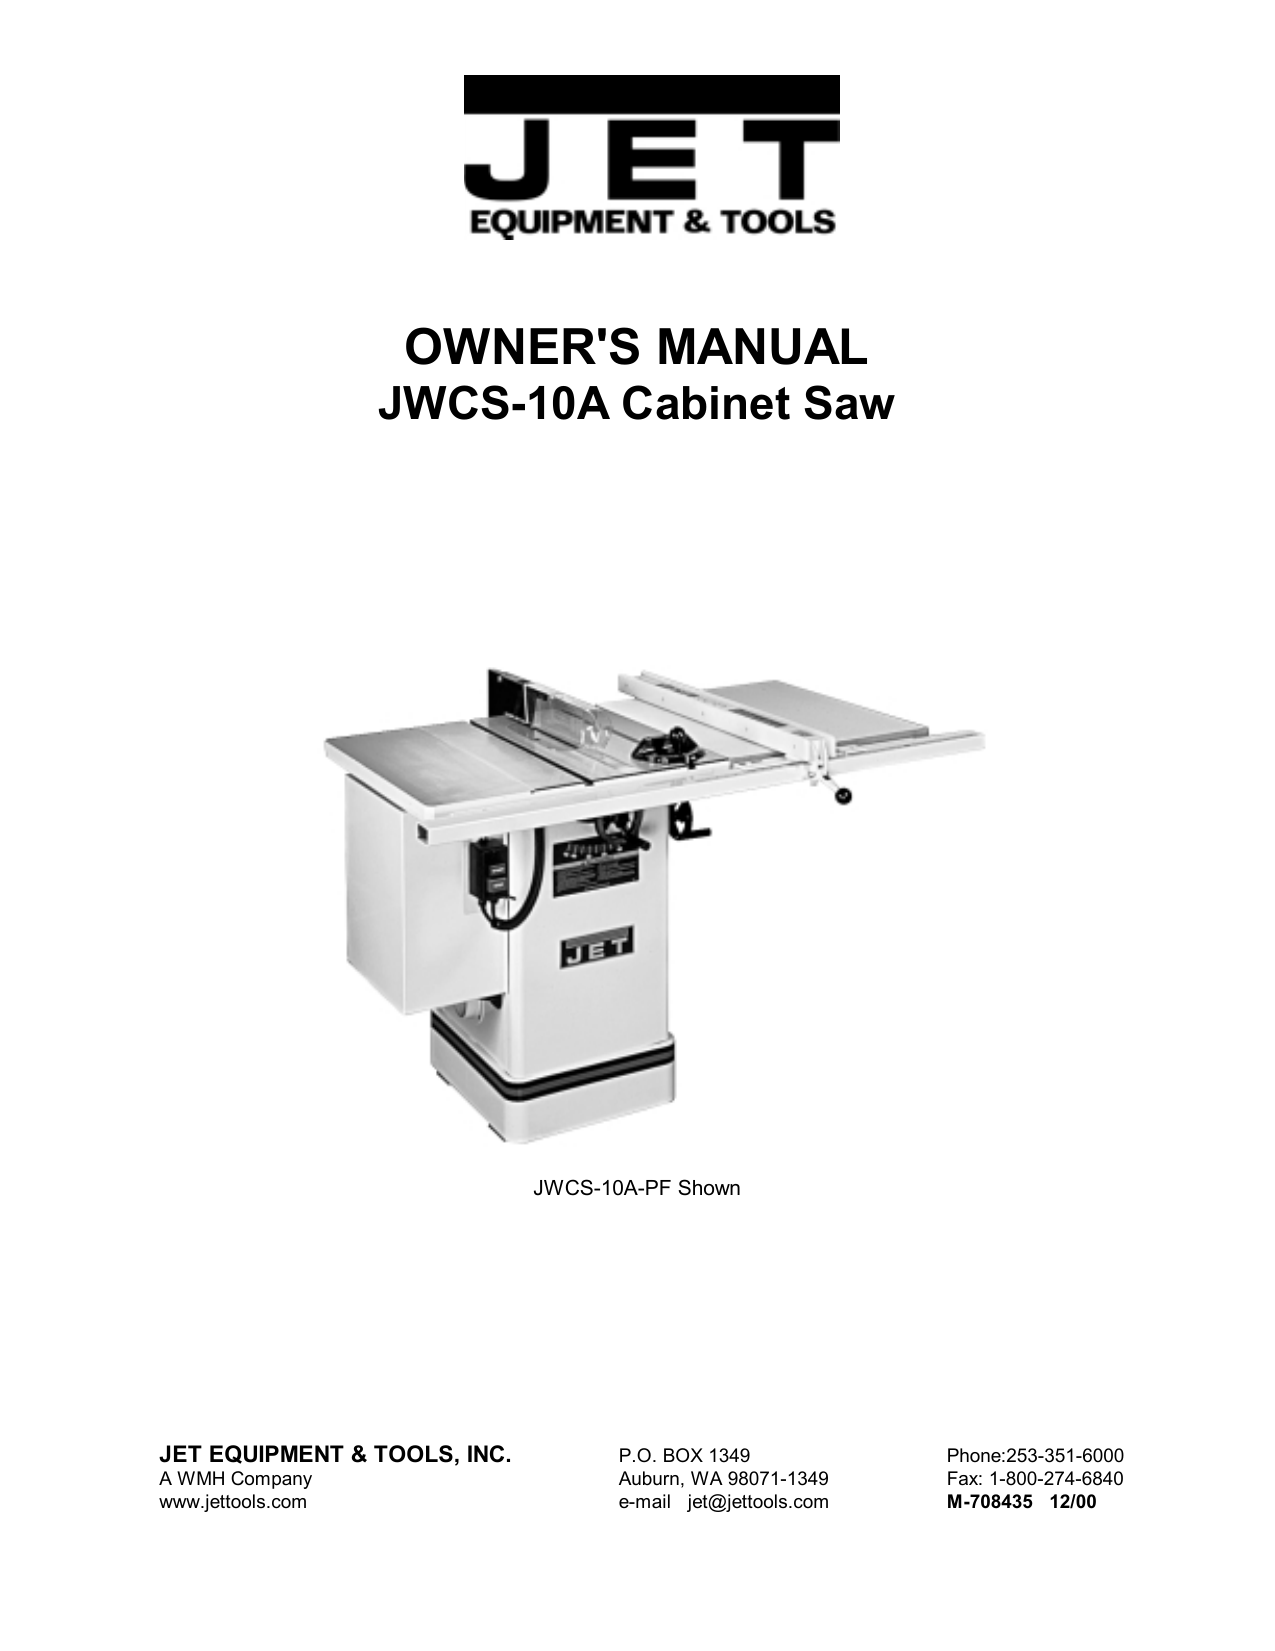 JET/Asian JCS-10 Model 10" Cabinet Table Saw Operator's & Parts Manual 0889 